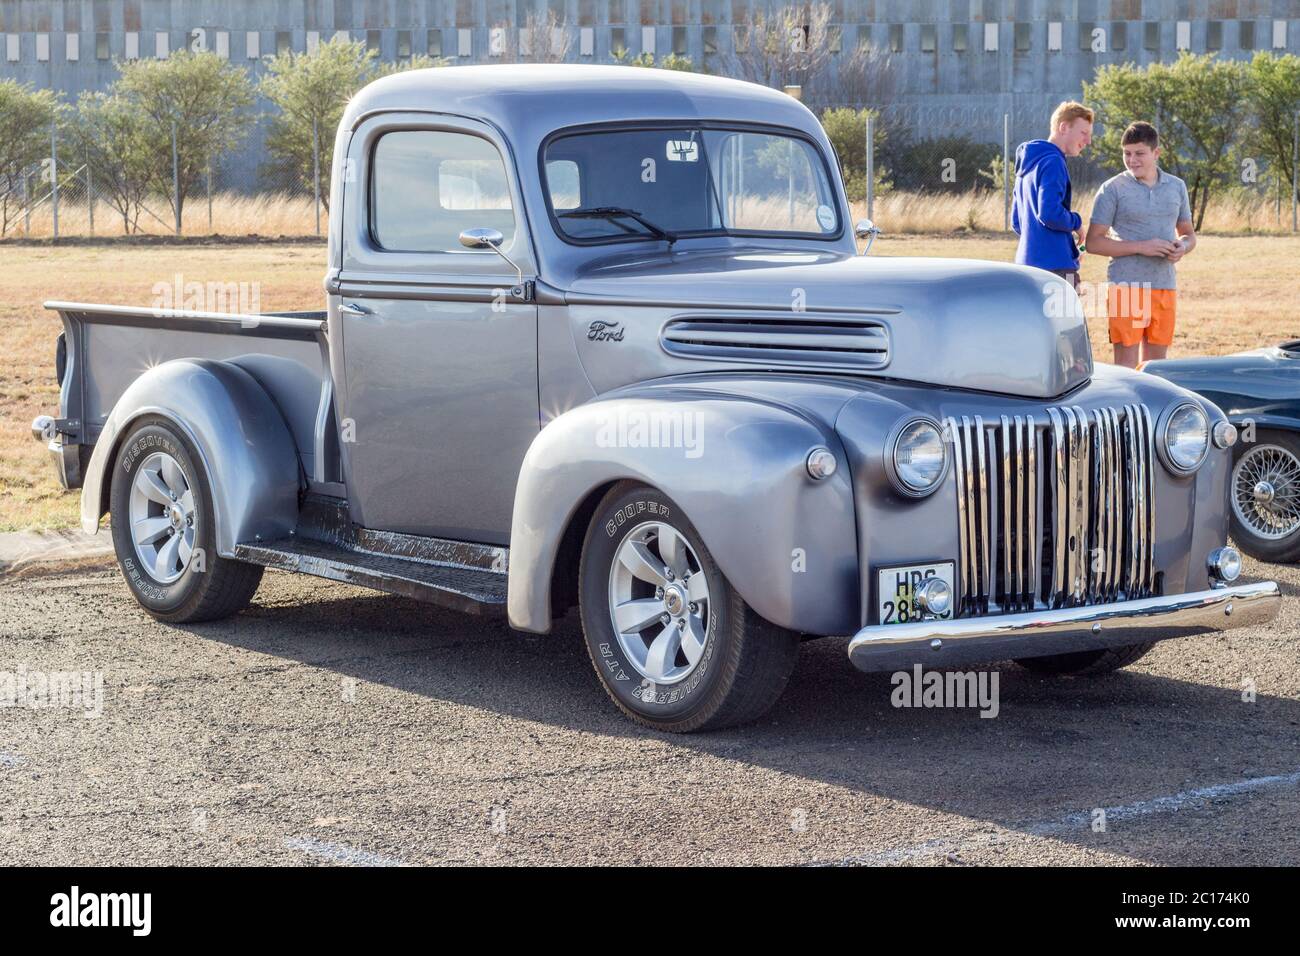 QUEENSTOWN, SOUTH AFRICA - 17 June 2017: Vintage F series silver grey Ford pick up truck hot rod Stock Photo